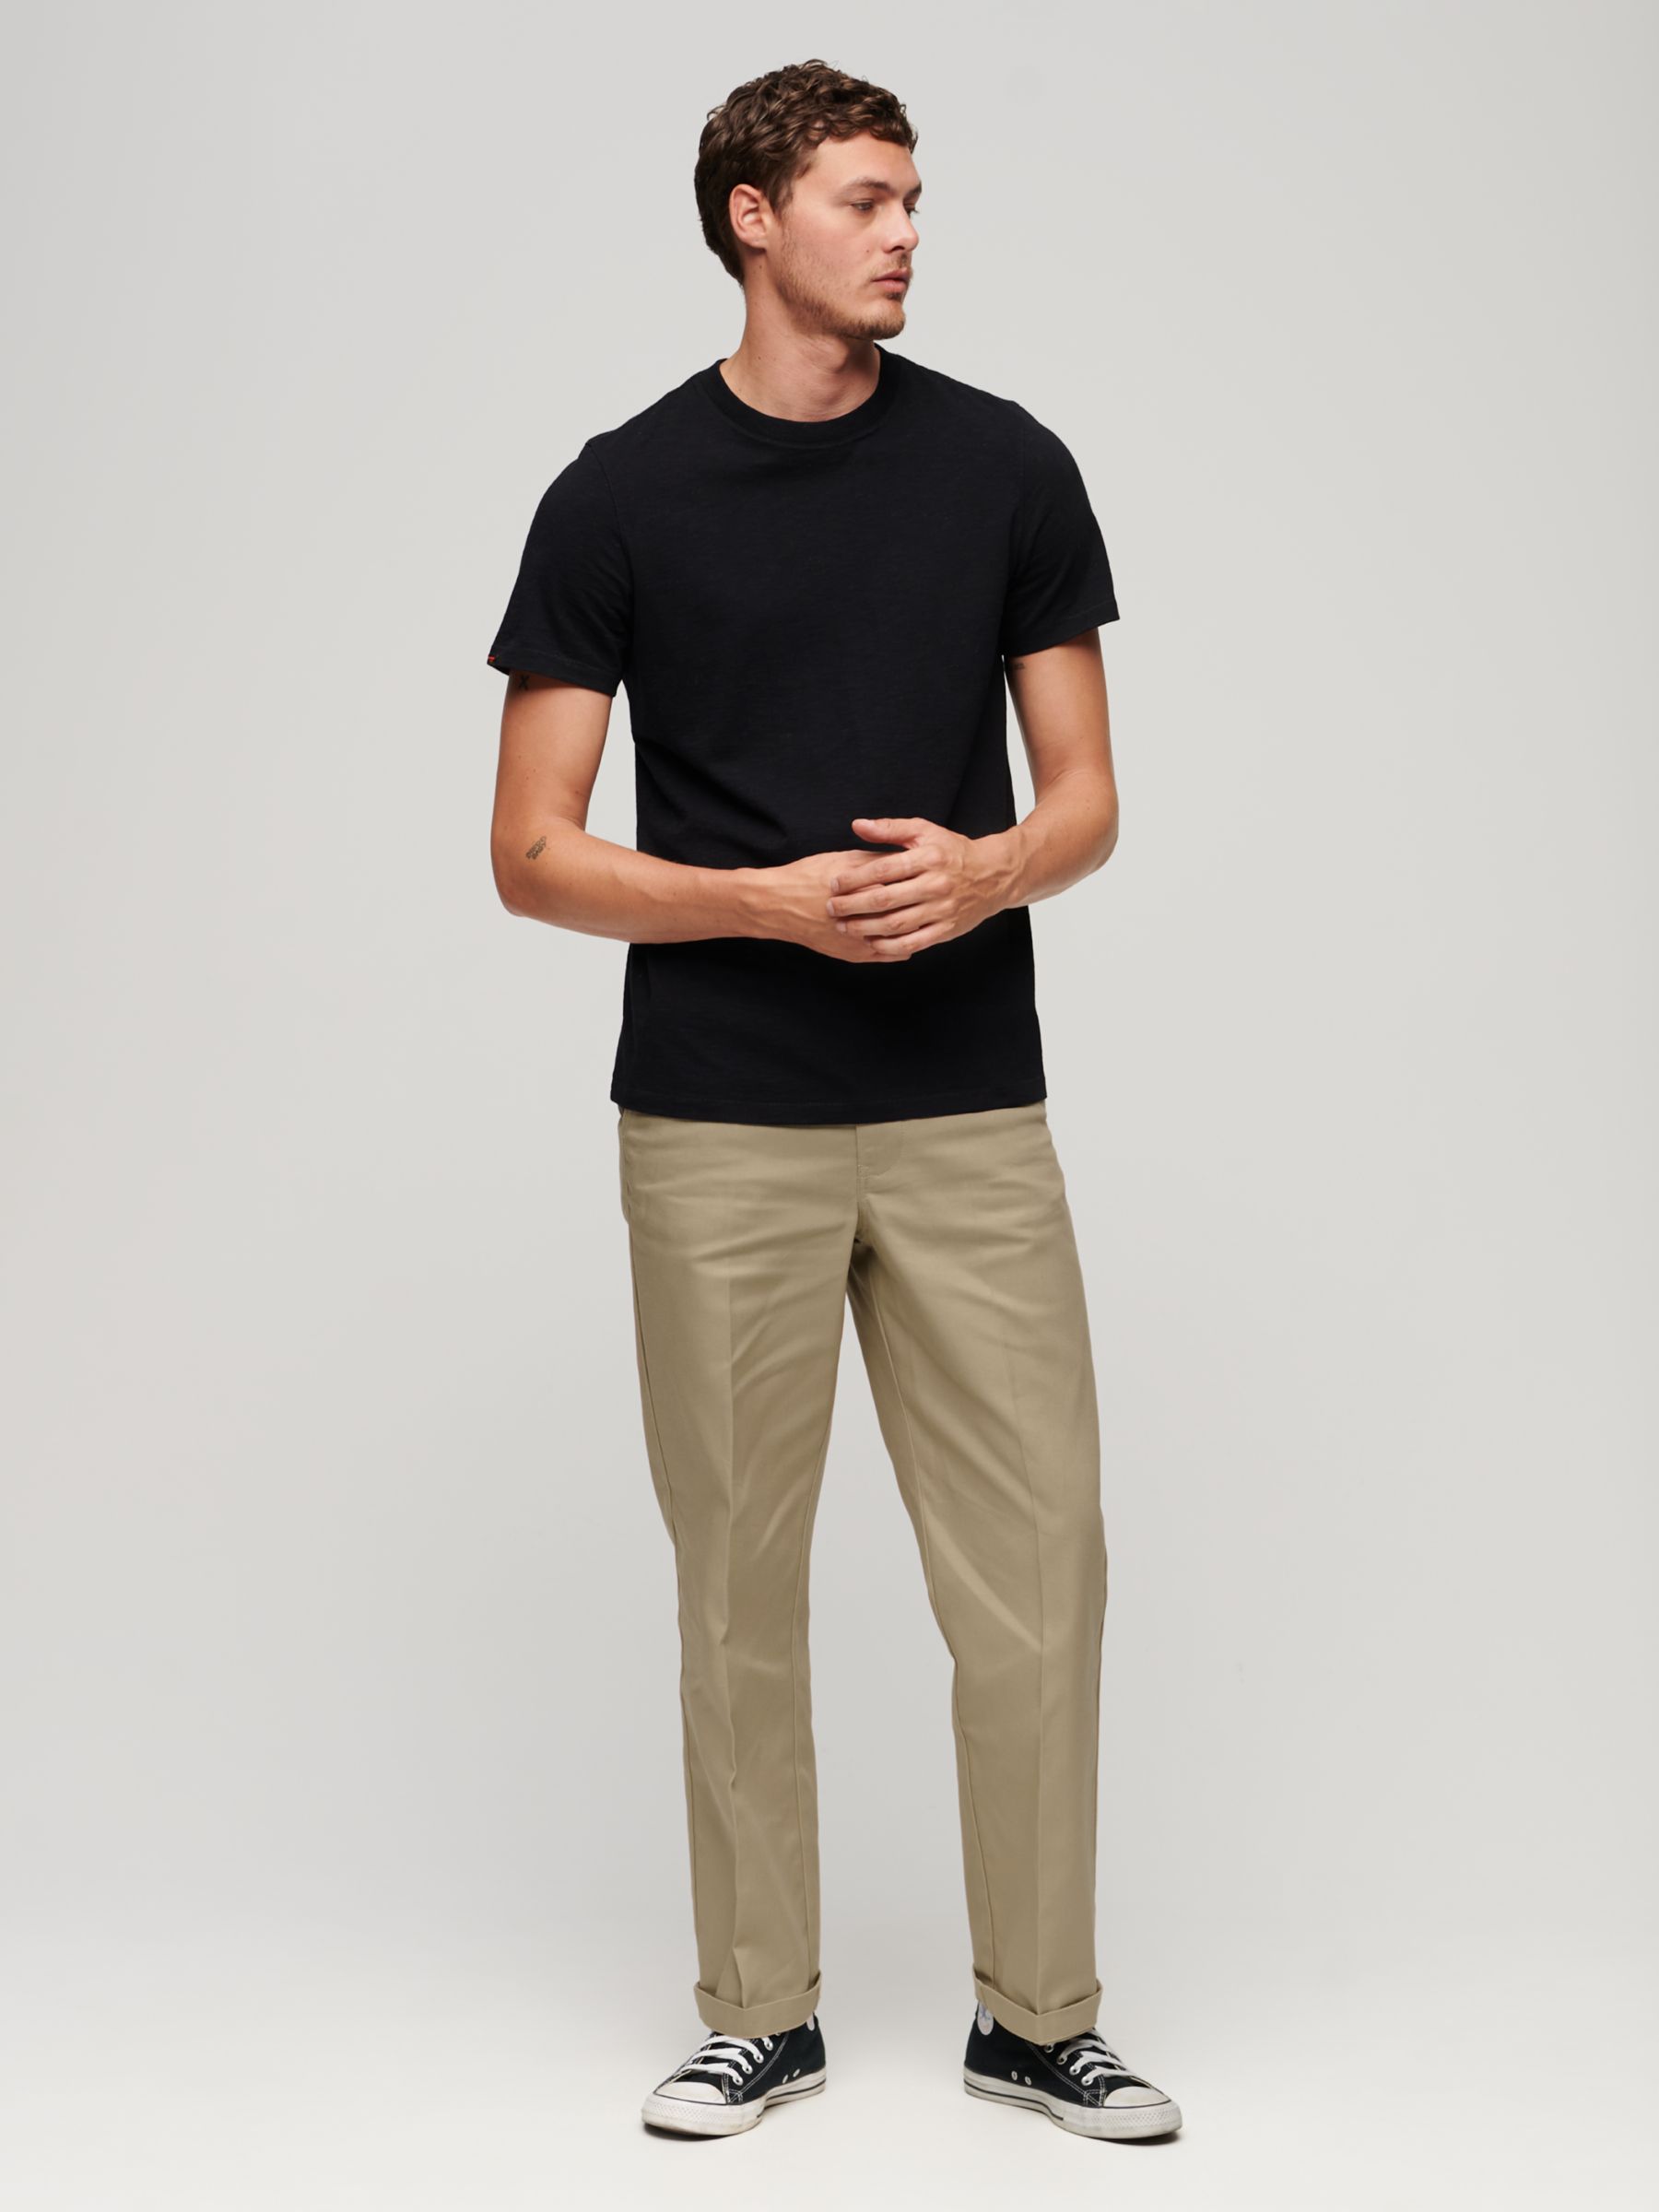 Superdry Straight Chinos, Taupe Brown at John Lewis & Partners